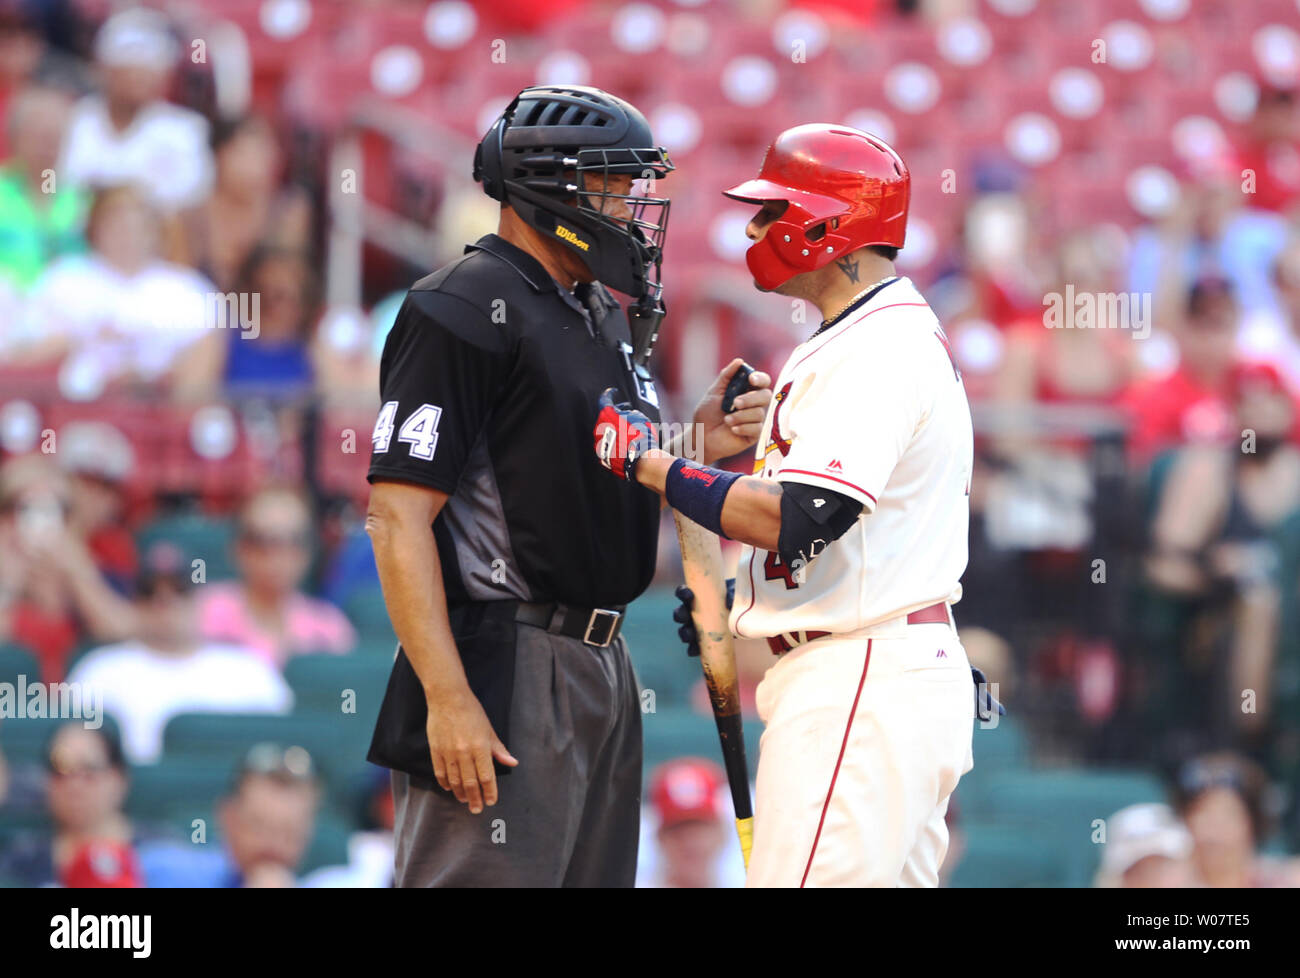 St. Louis Cardinals Yadier Molina argues a strike call with home plate umpire Kerwin Danley in the ninth inning during a game against the Texas Rangers at Busch Stadium in St. Louis on June 18, 2016. Texas won the game 4-3.   Photo by Bill Greenblatt/UPI Stock Photo